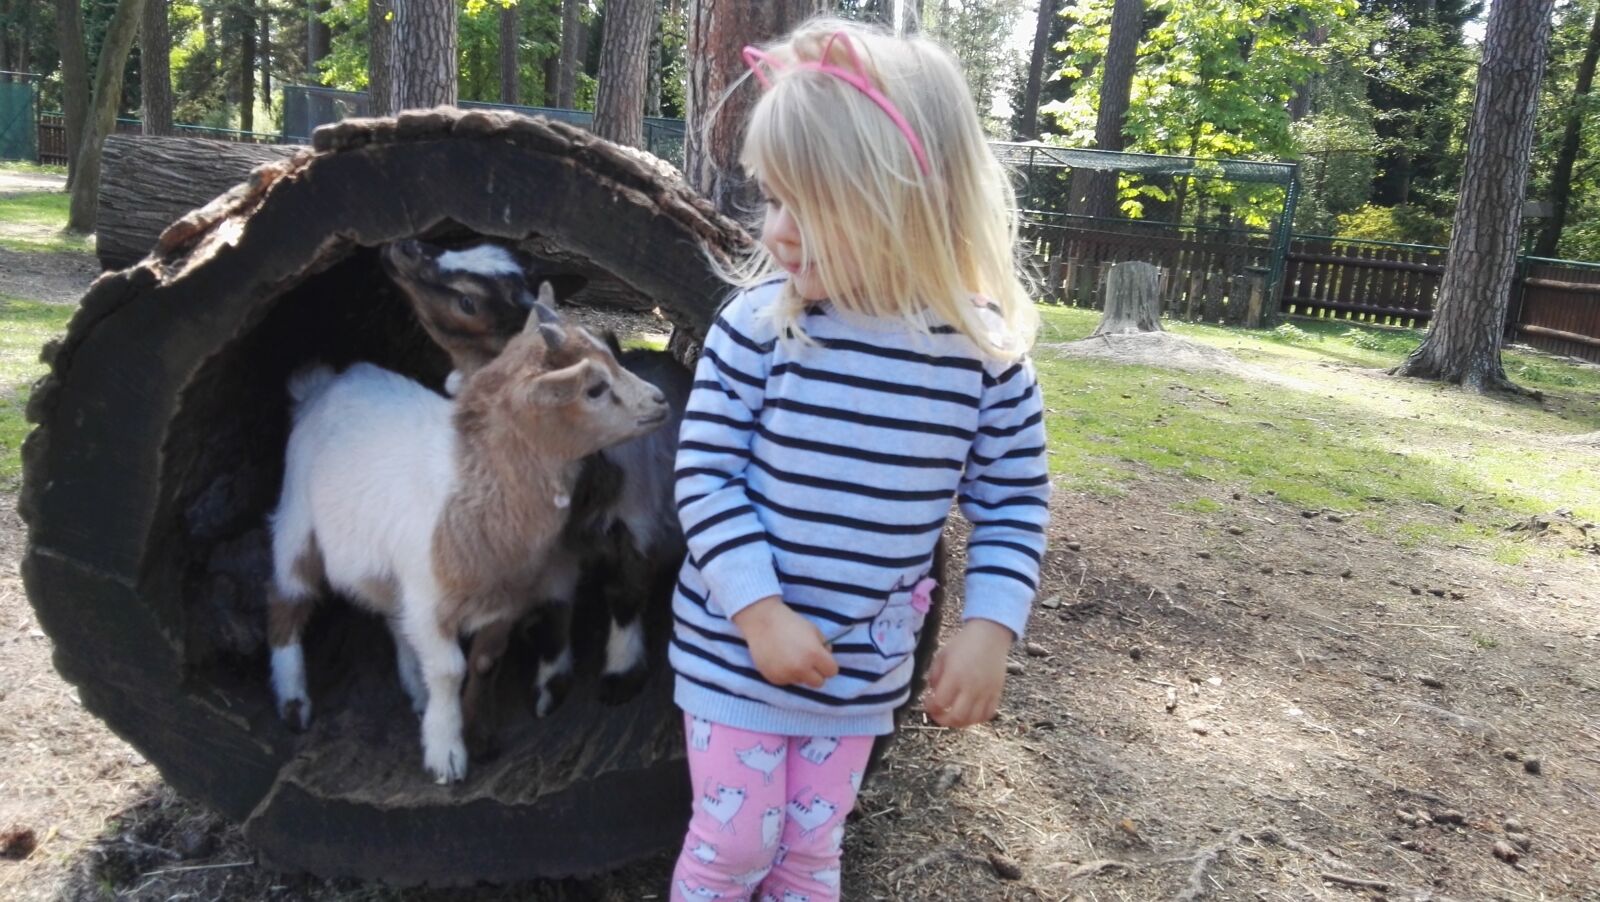 HUAWEI P8 sample photo. Children, outdoors, goat photography